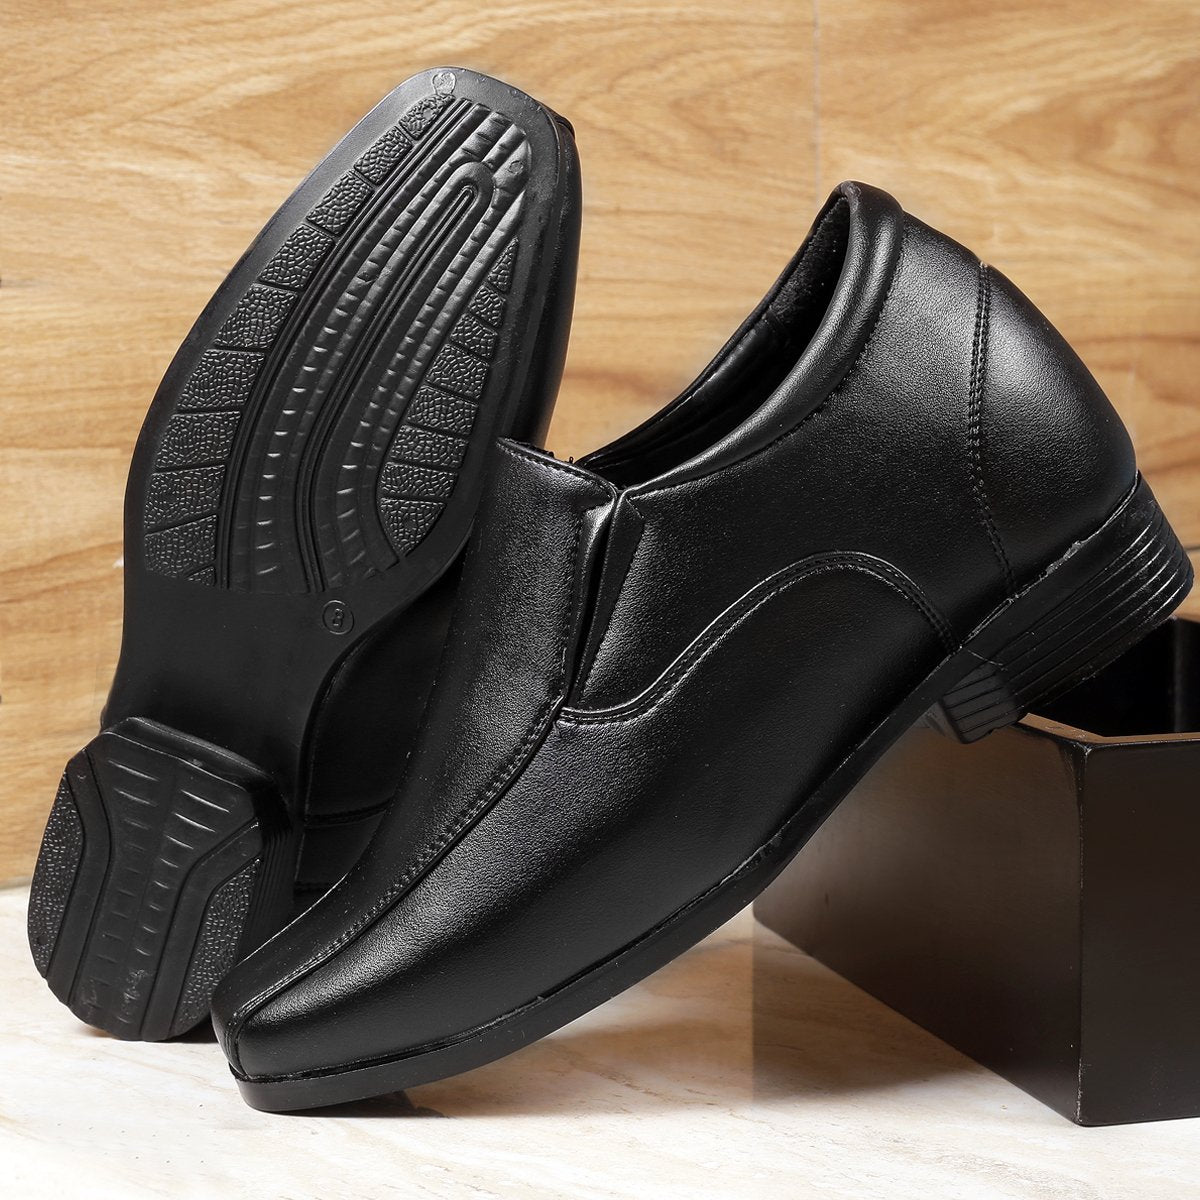 Buy Men's formal shoes online at up to 60% off - Amazon.in